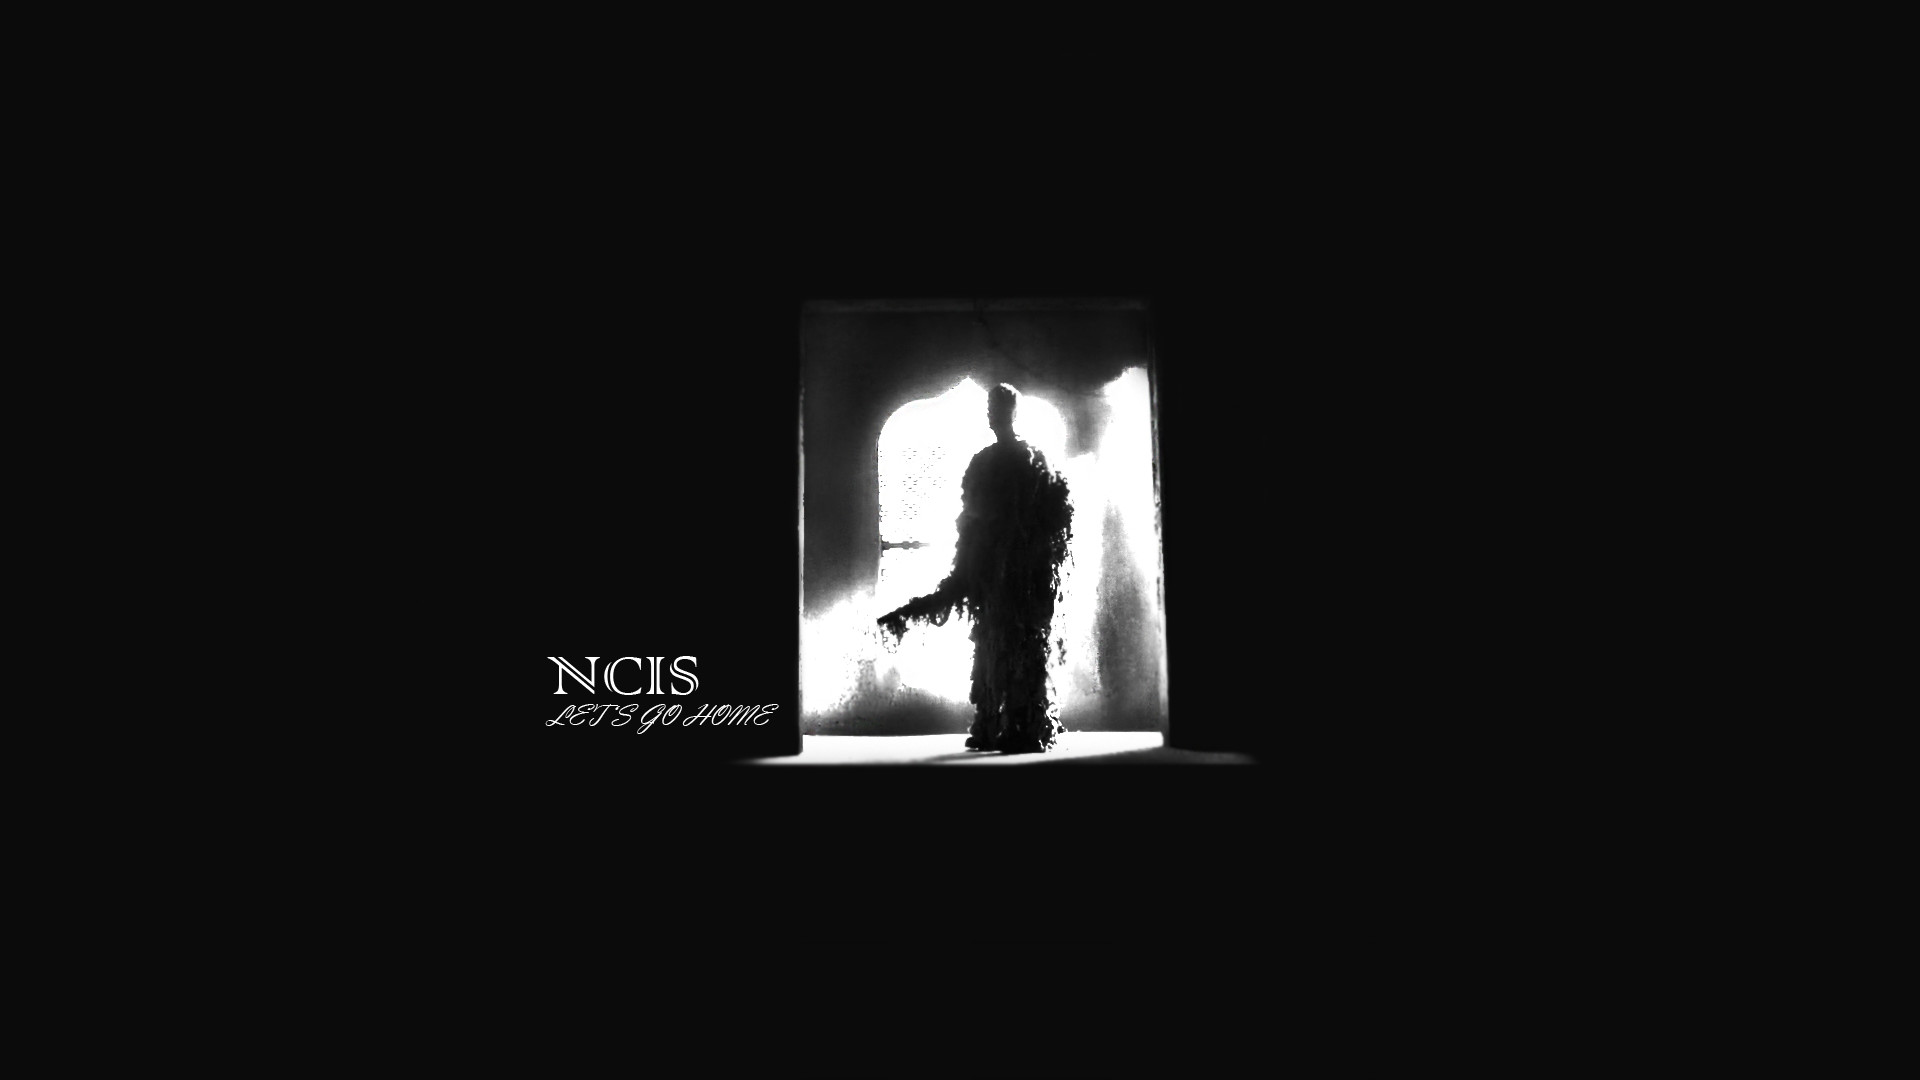 1920x1080 #5 Ncis Logo Wallpaper Badge Related Keywords & Suggestions